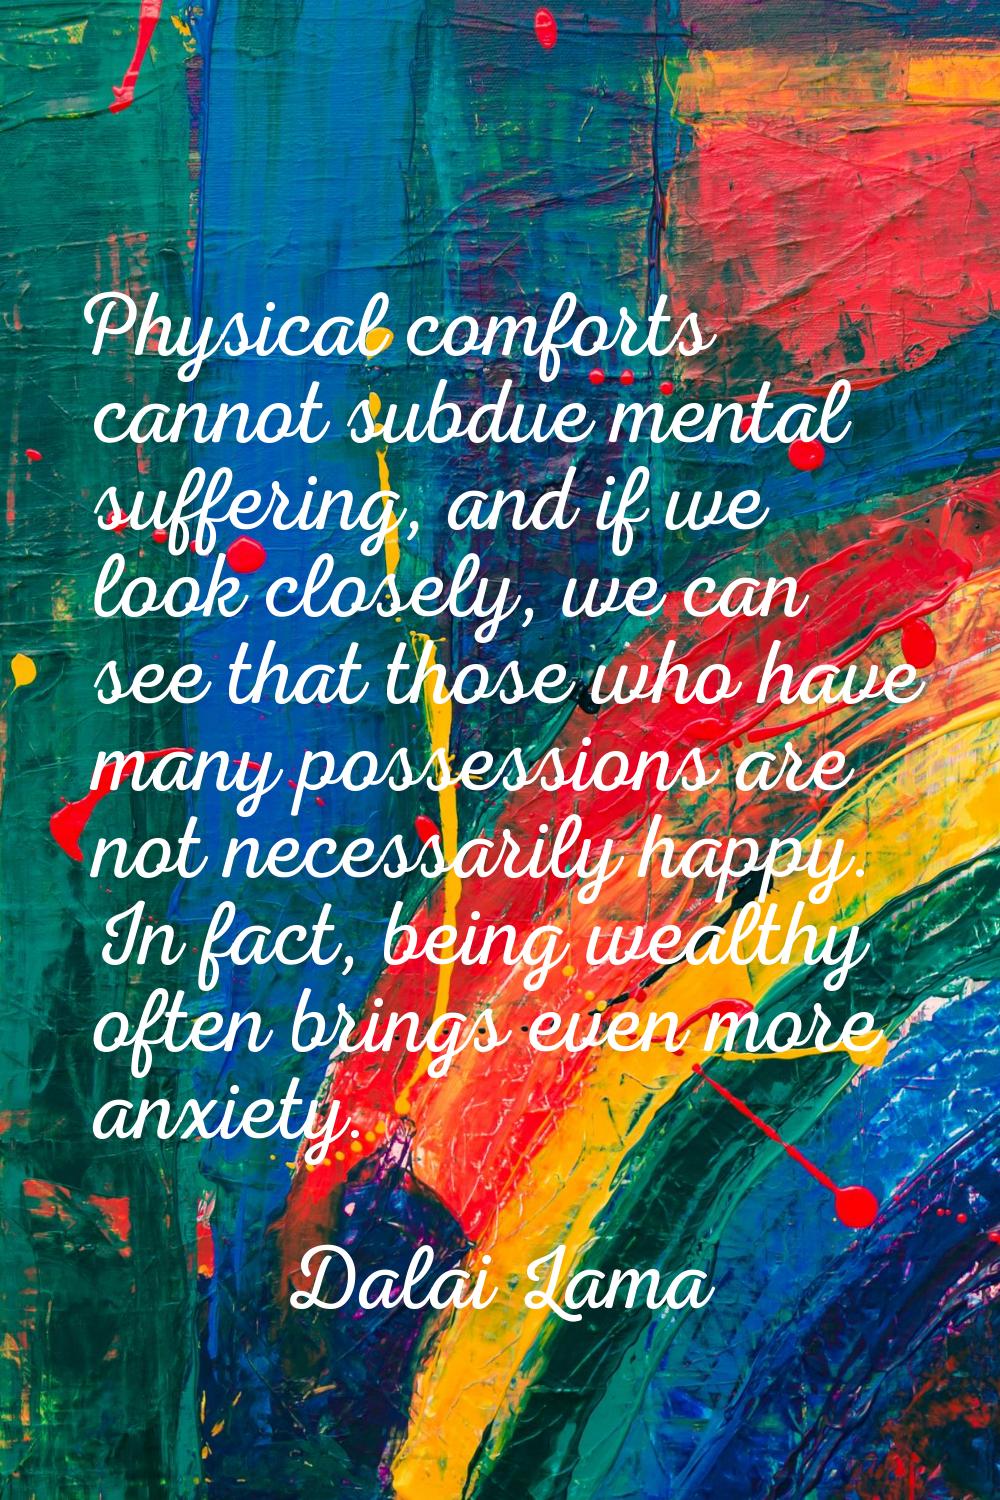 Physical comforts cannot subdue mental suffering, and if we look closely, we can see that those who